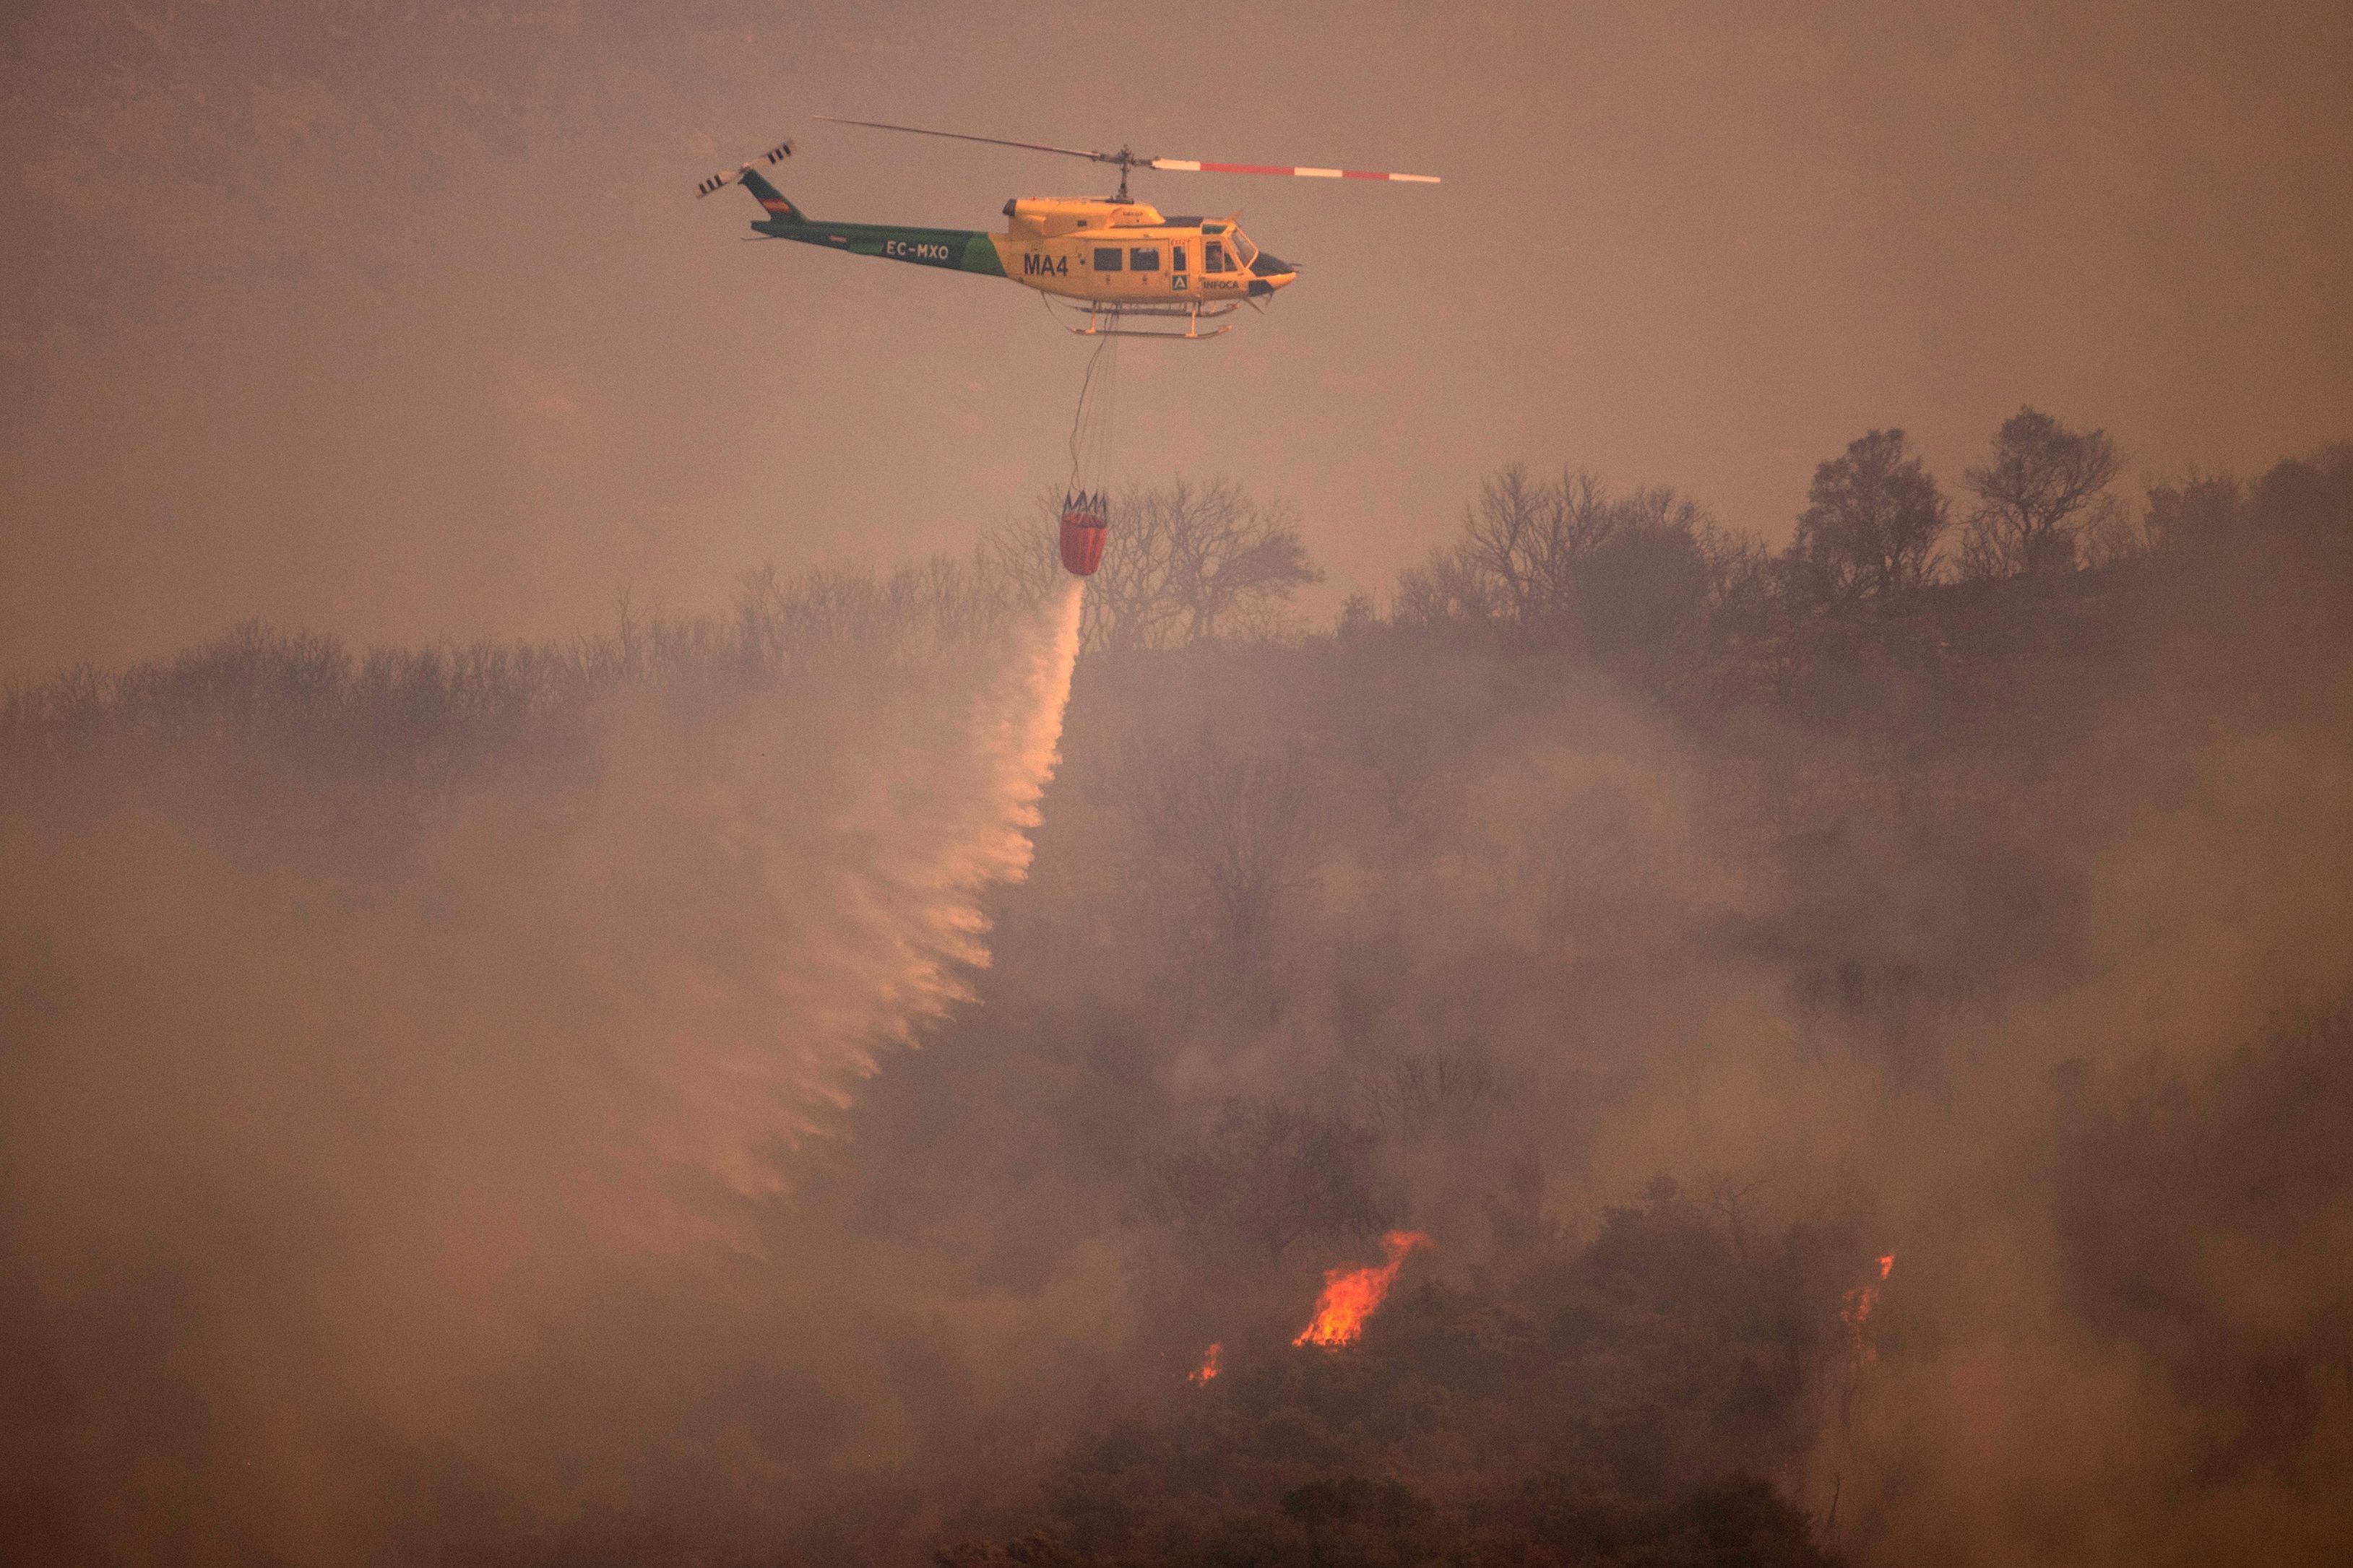  A helicopter is pictured from Alhaurin de la Torre as it drops water over a wildfire in Sierra de Mijas mountain range in Malaga province on July 15.